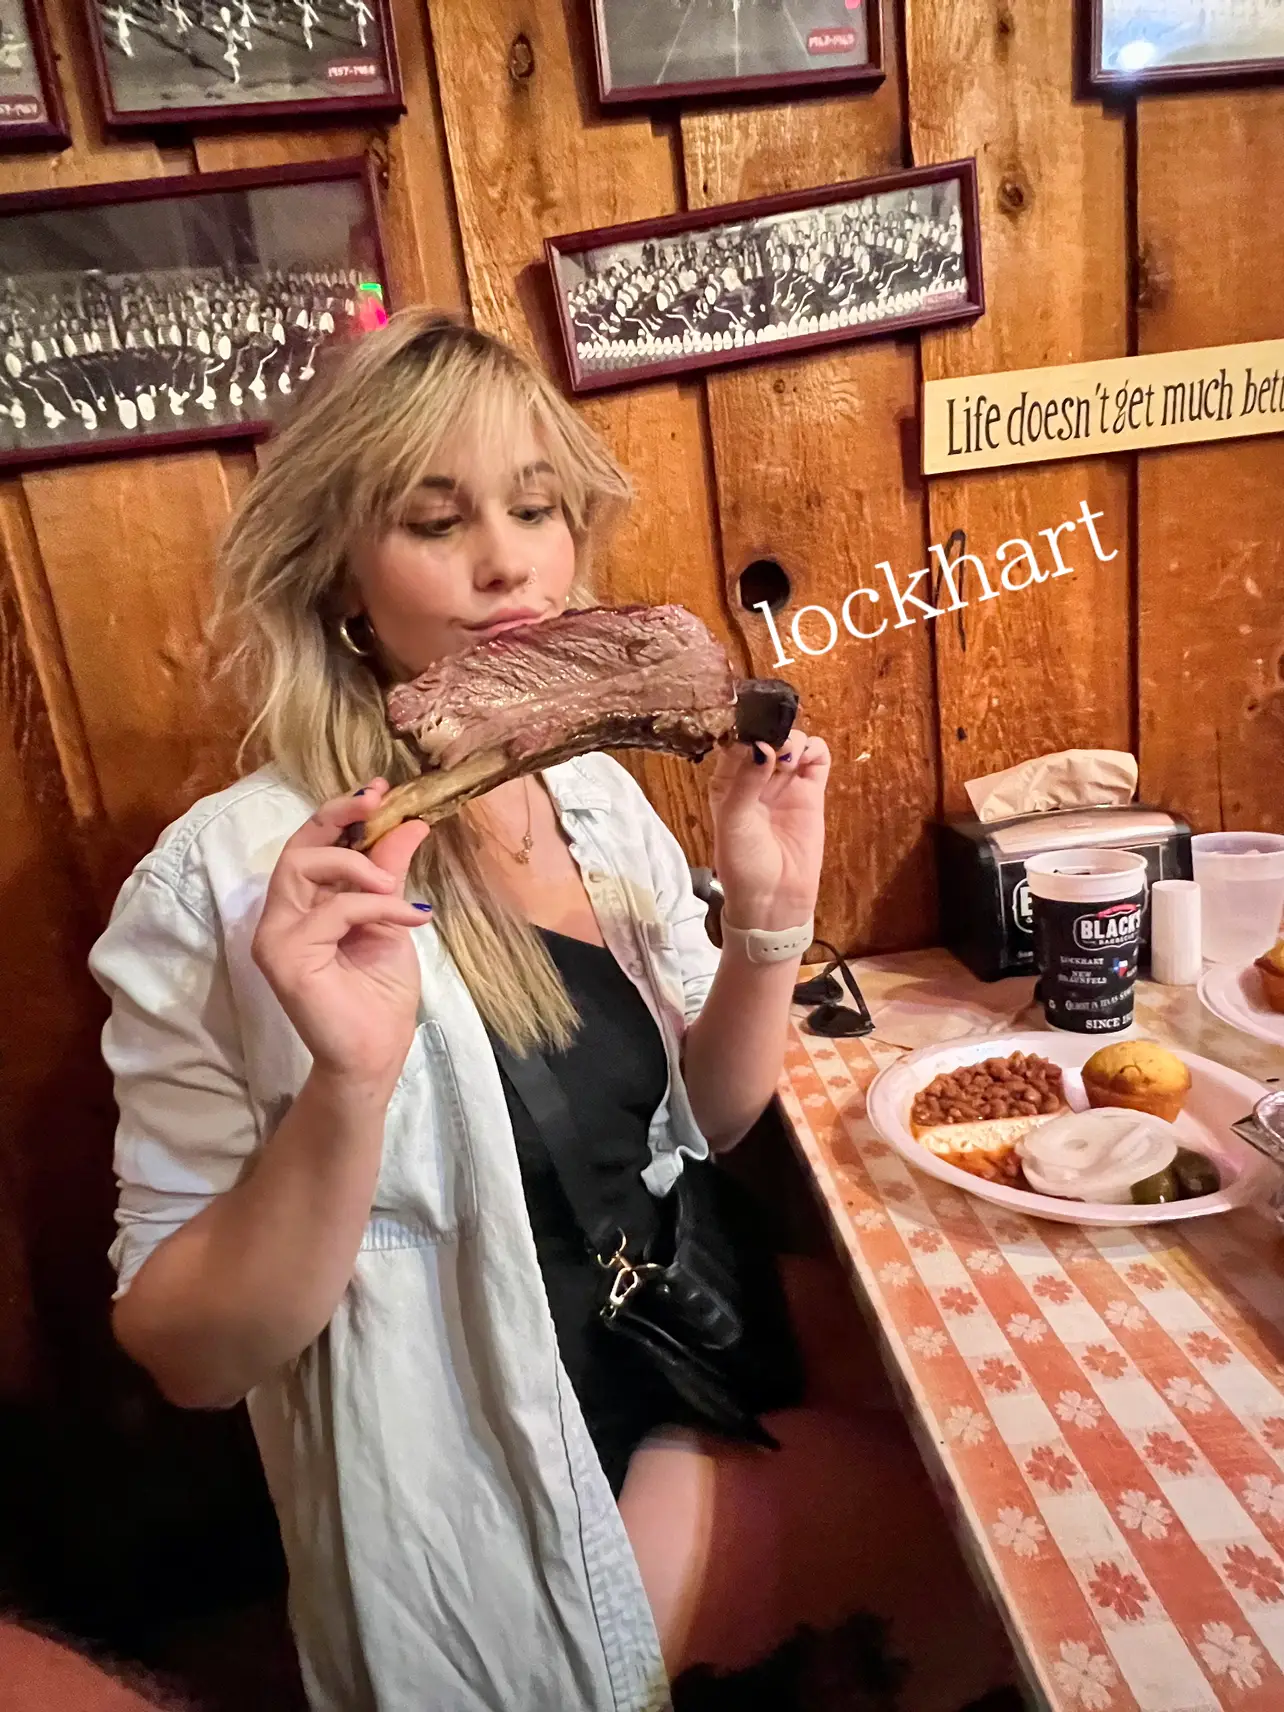  A woman is holding a large piece of meat, which is described as a large piece of meat.